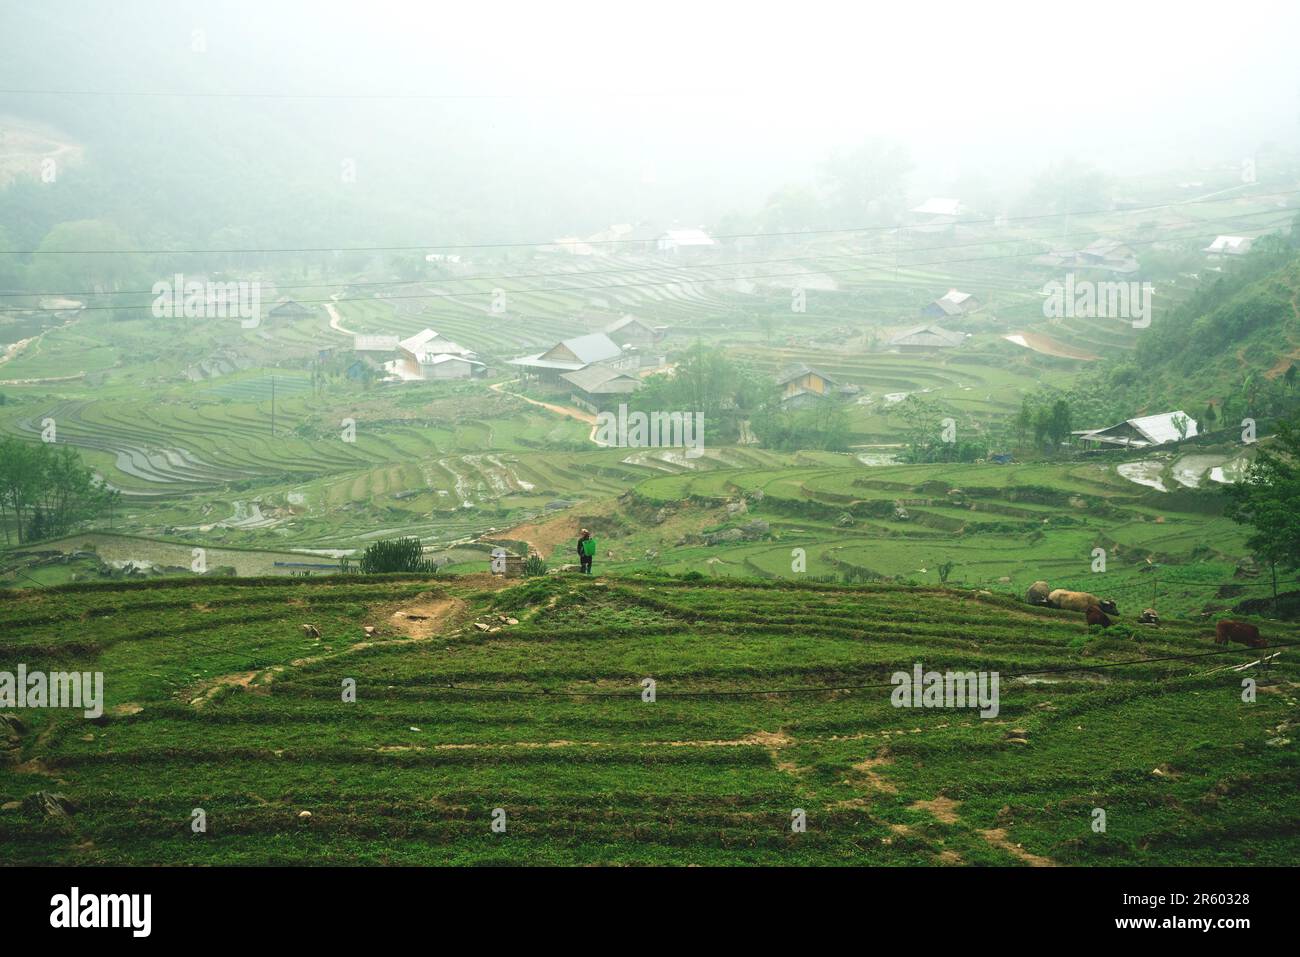 Farmer standing in the middle of green terraced rice fields overlooking a village covered in mist, Sapa, Vietnam Stock Photo